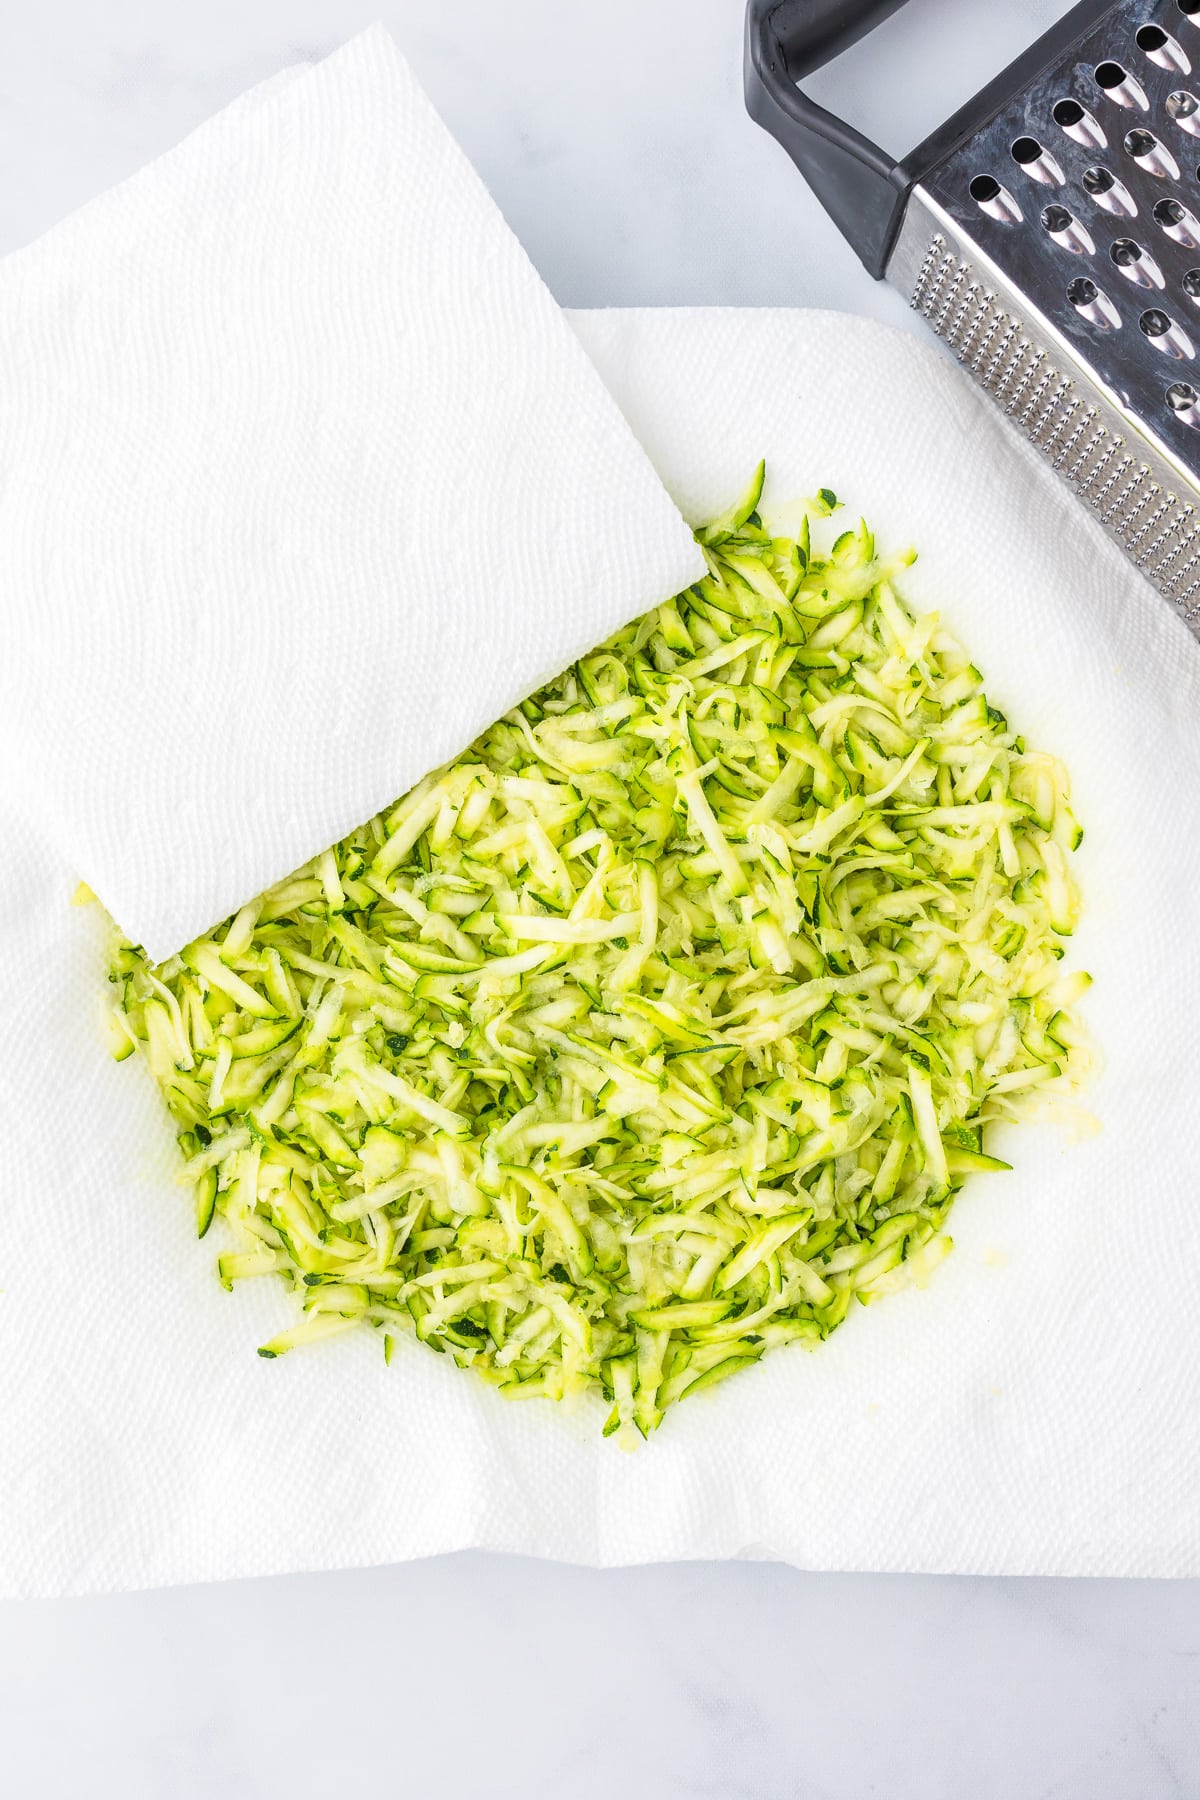 Shredded zucchini being dried on paper towels with a metal grater on the counter nearby.